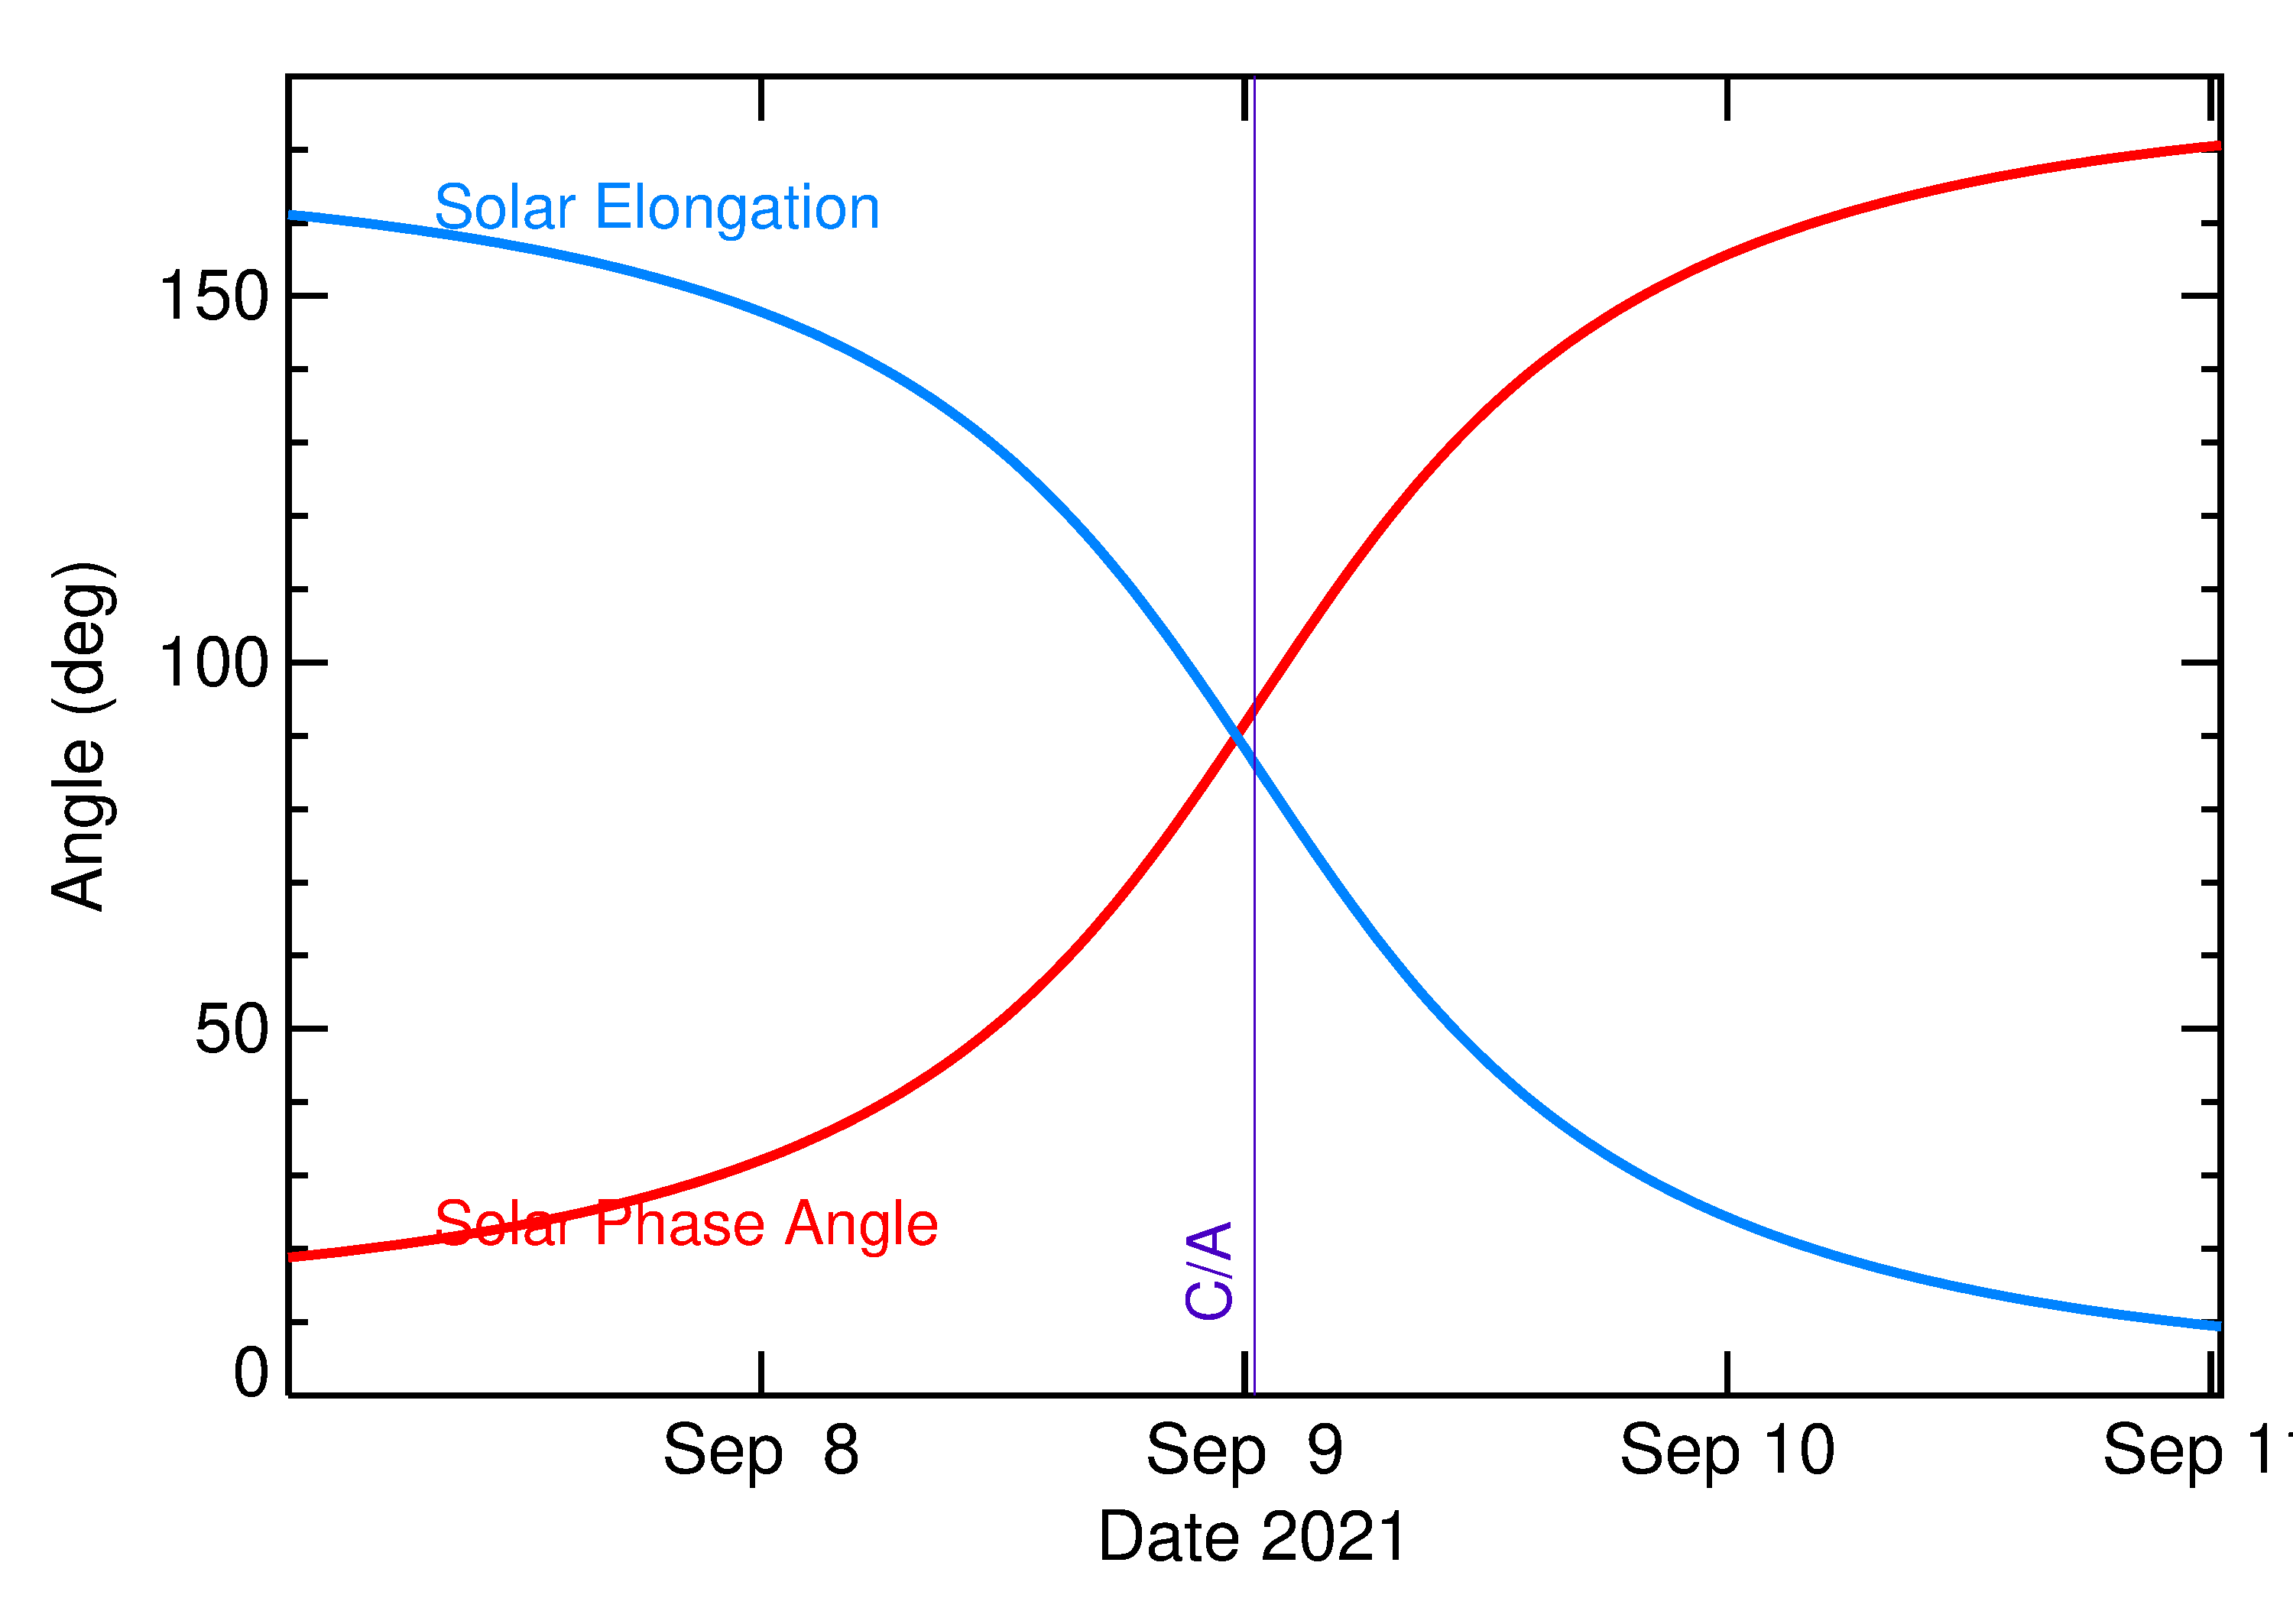 Solar Elongation and Solar Phase Angle of 2021 RQ2 in the days around closest approach